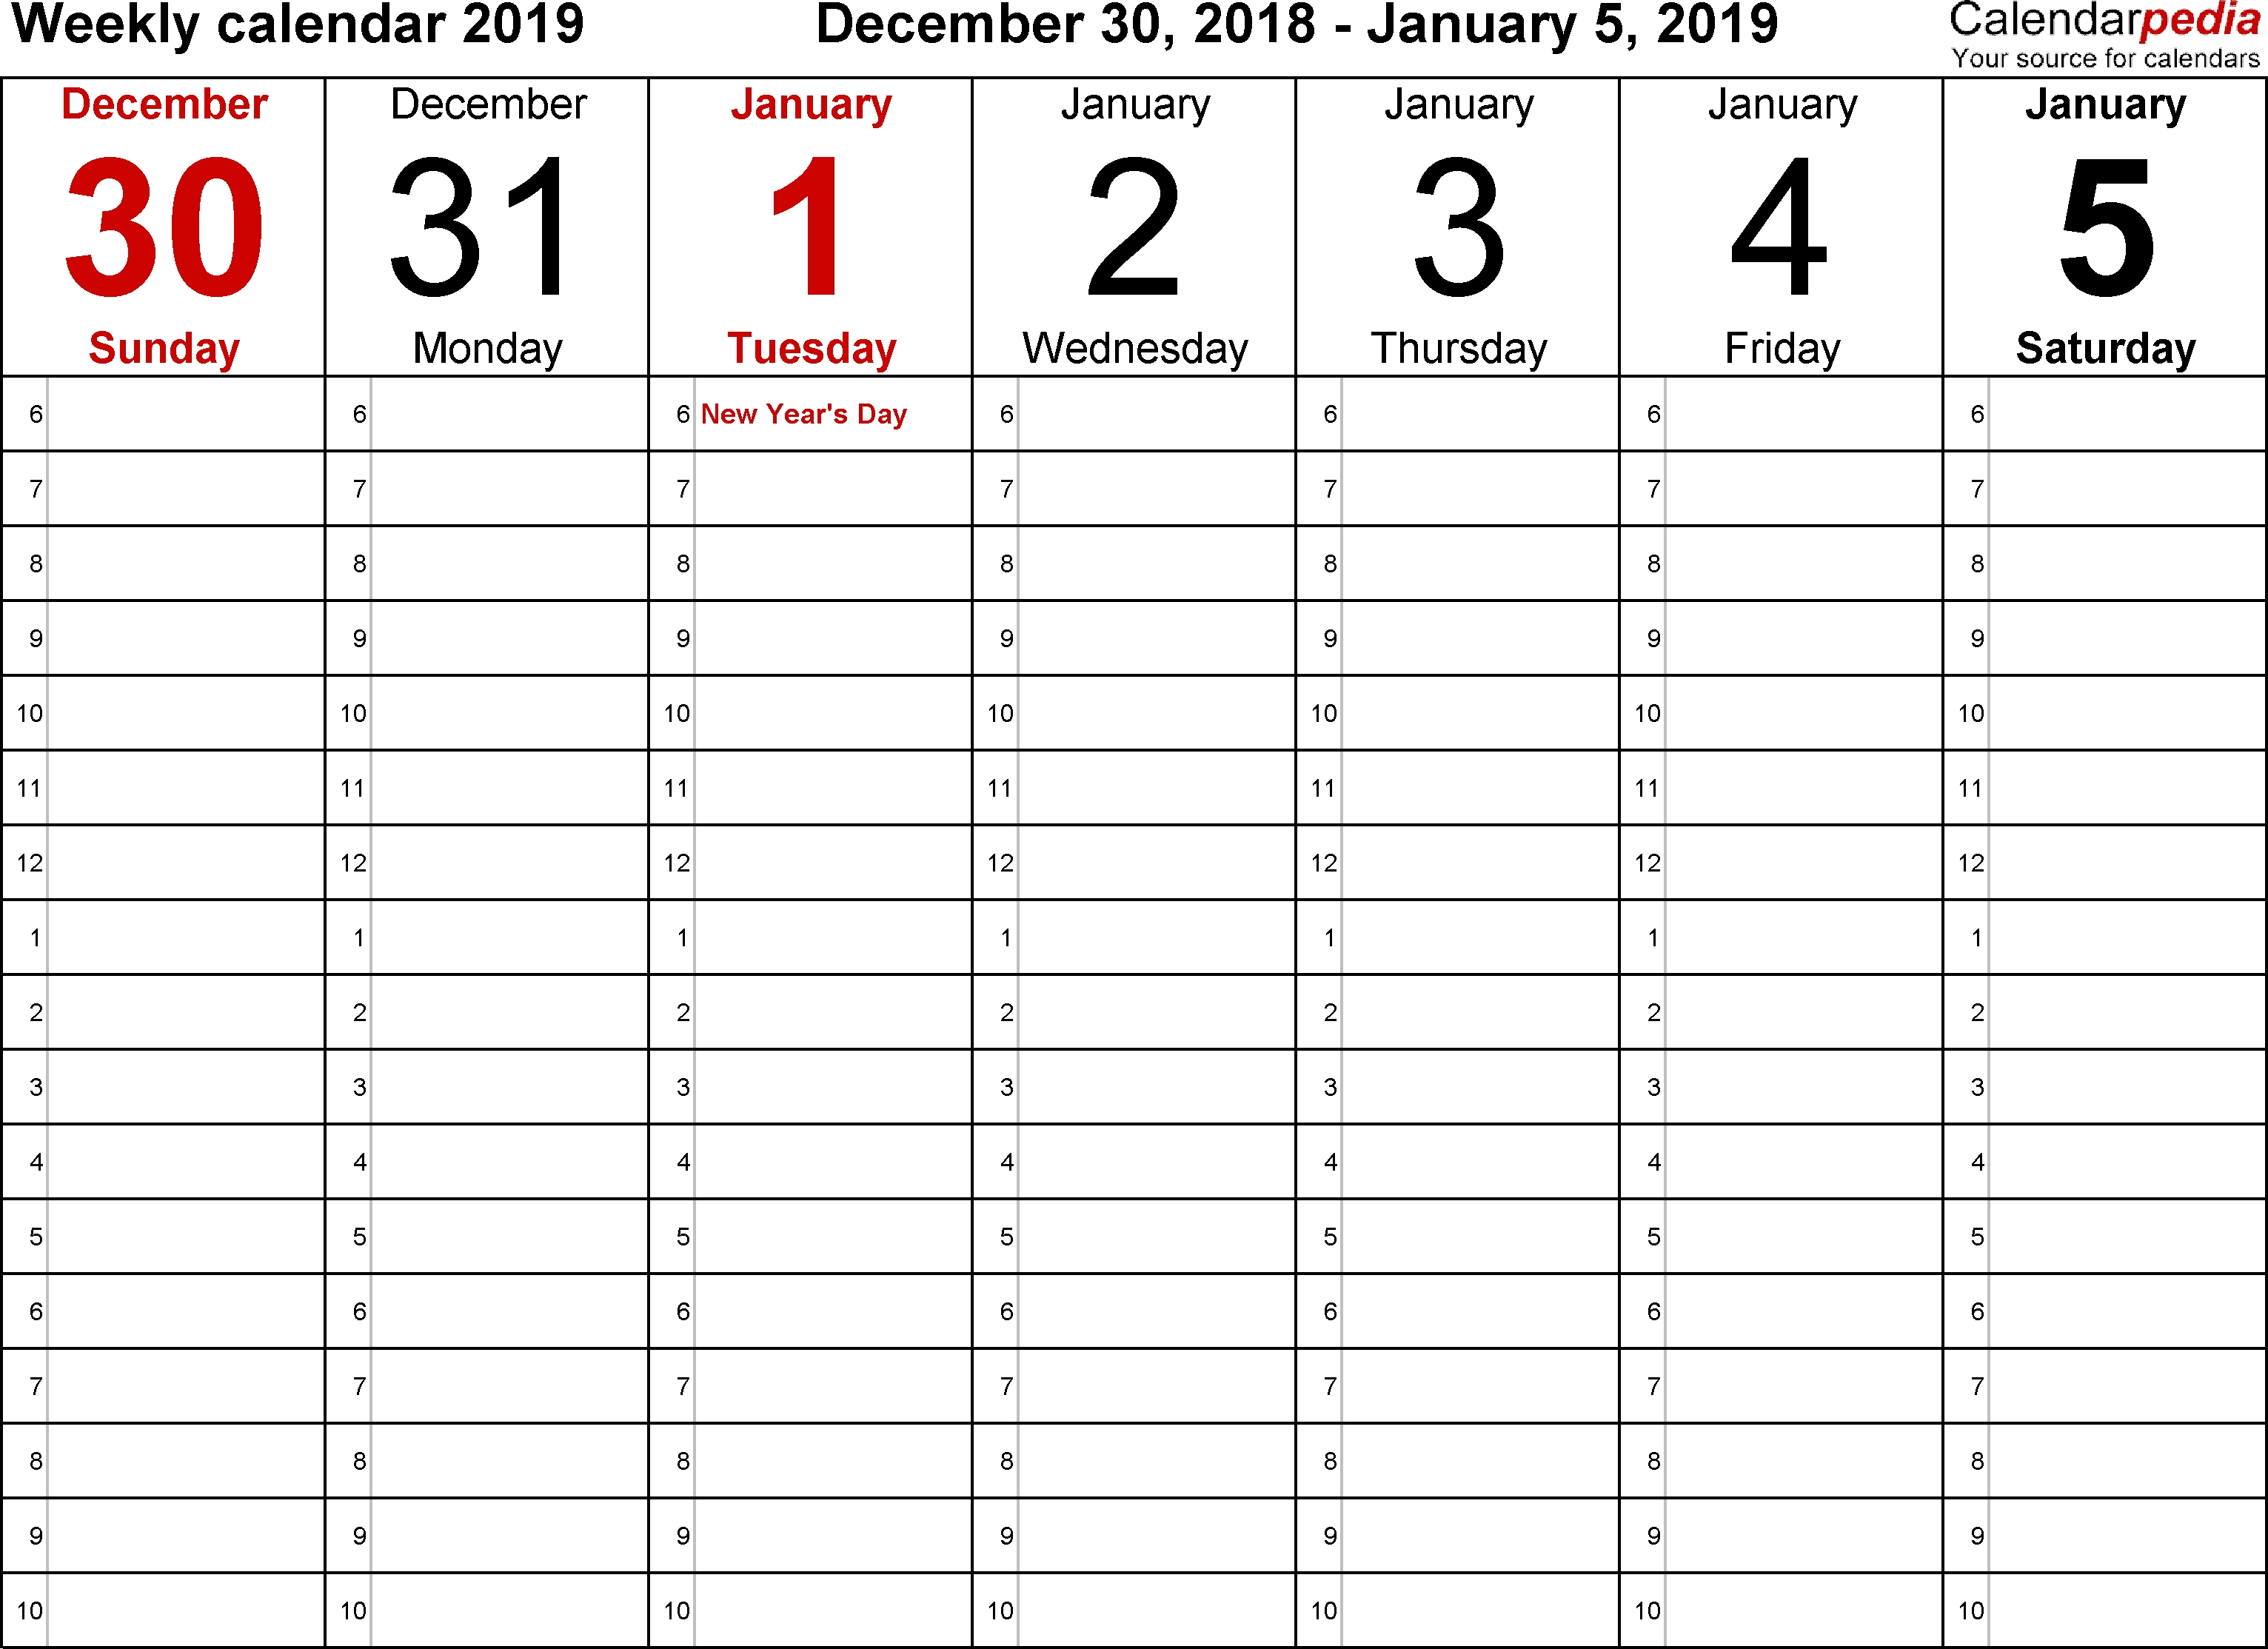 Weekly Calendar 2019 For Word - 12 Free Printable Templates within 4 Week Calendar To Print